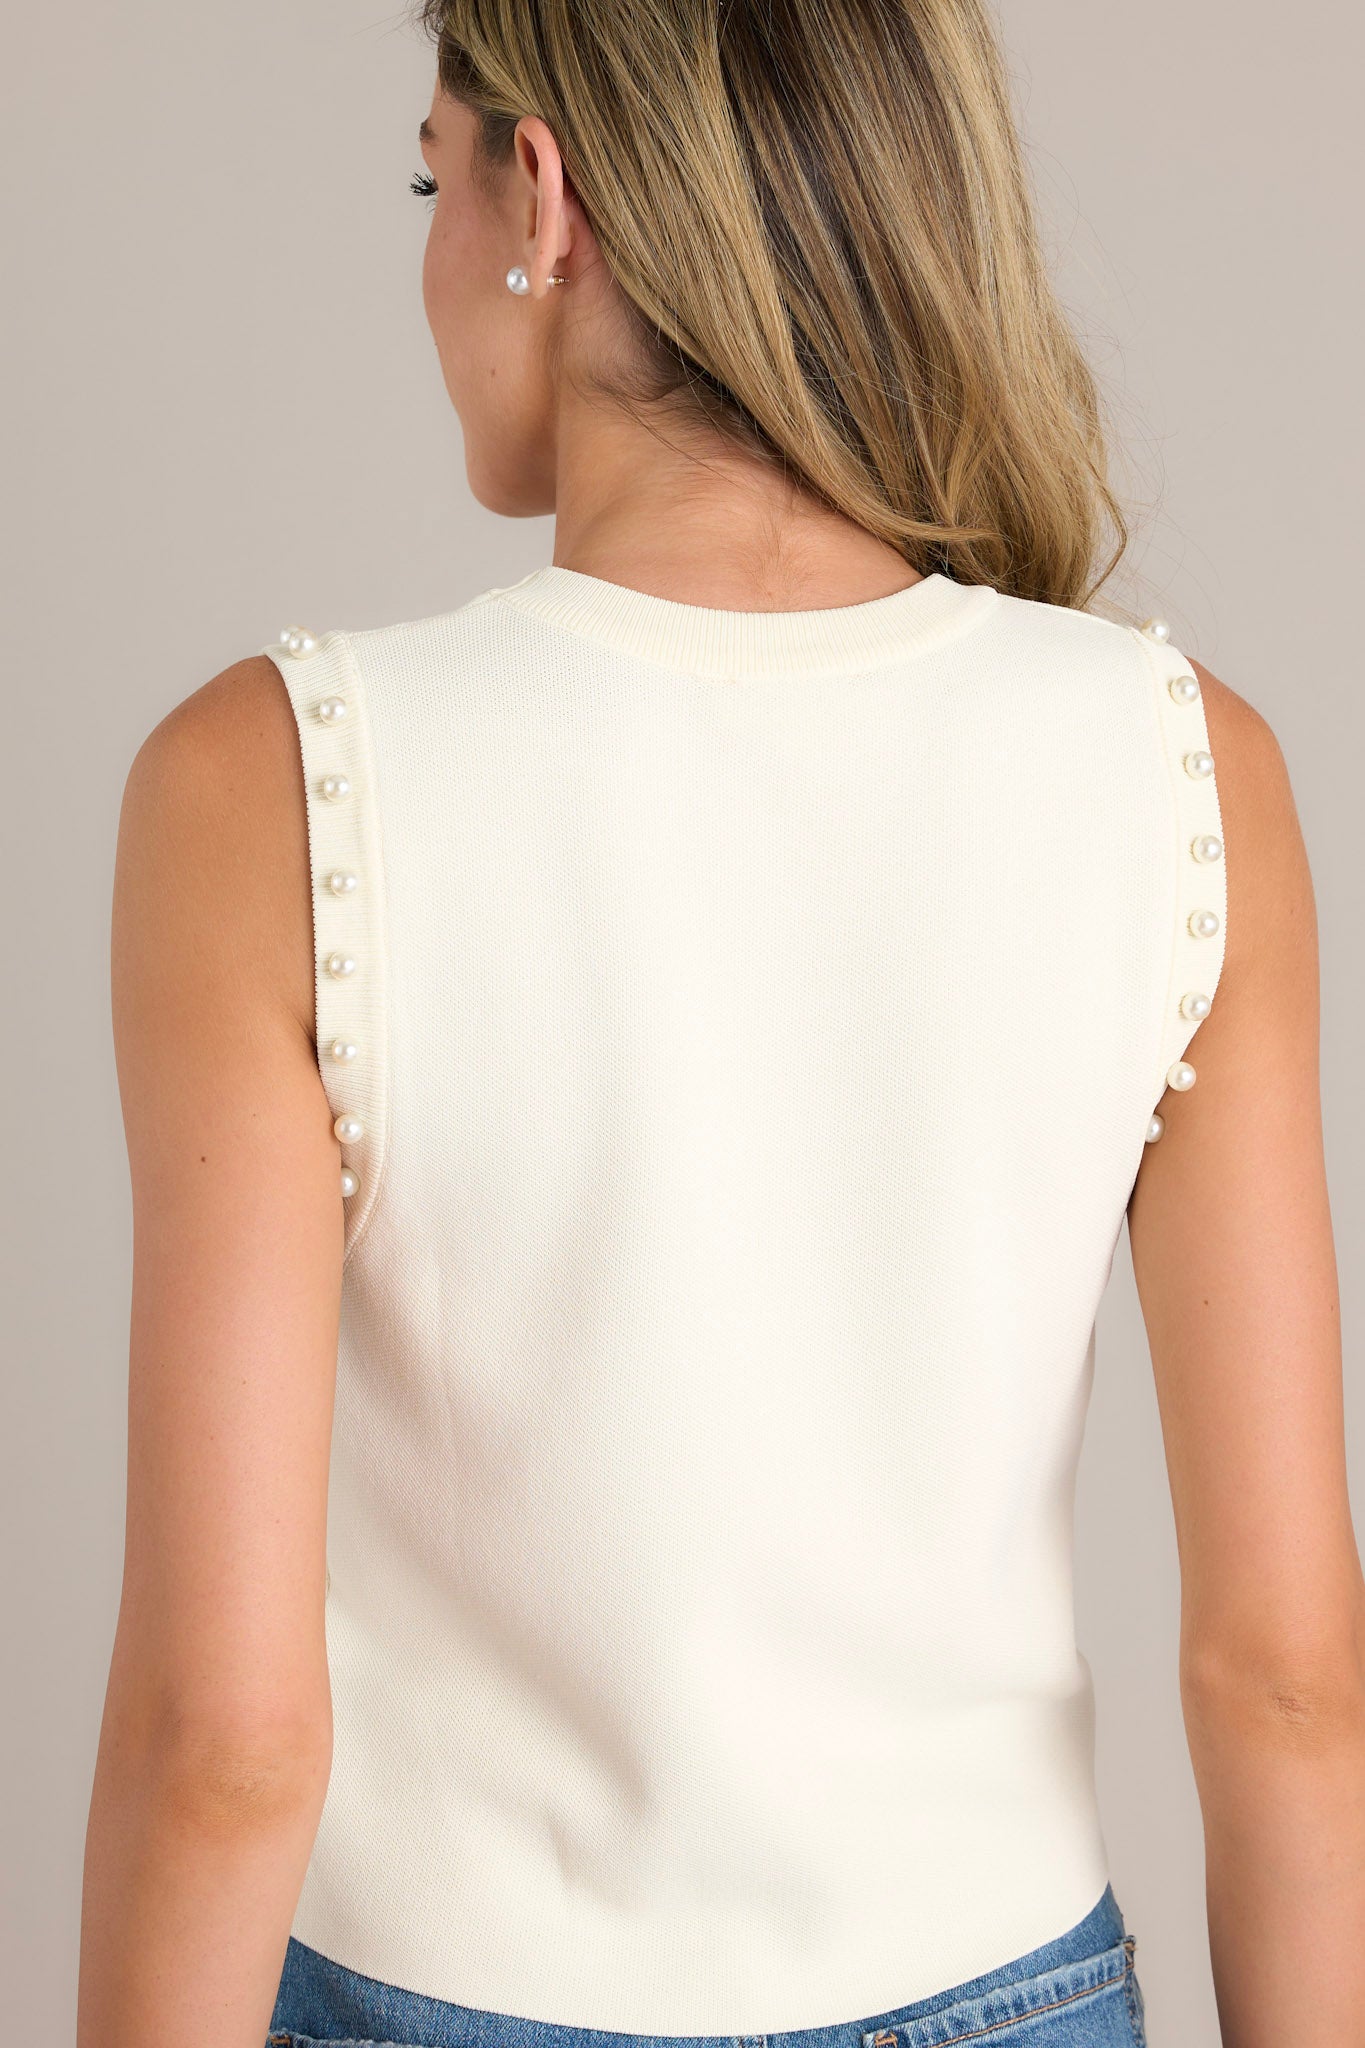 Back view of an ivory tank top showcasing the pearl embellished sleeves, soft material, and slightly cropped hemline.